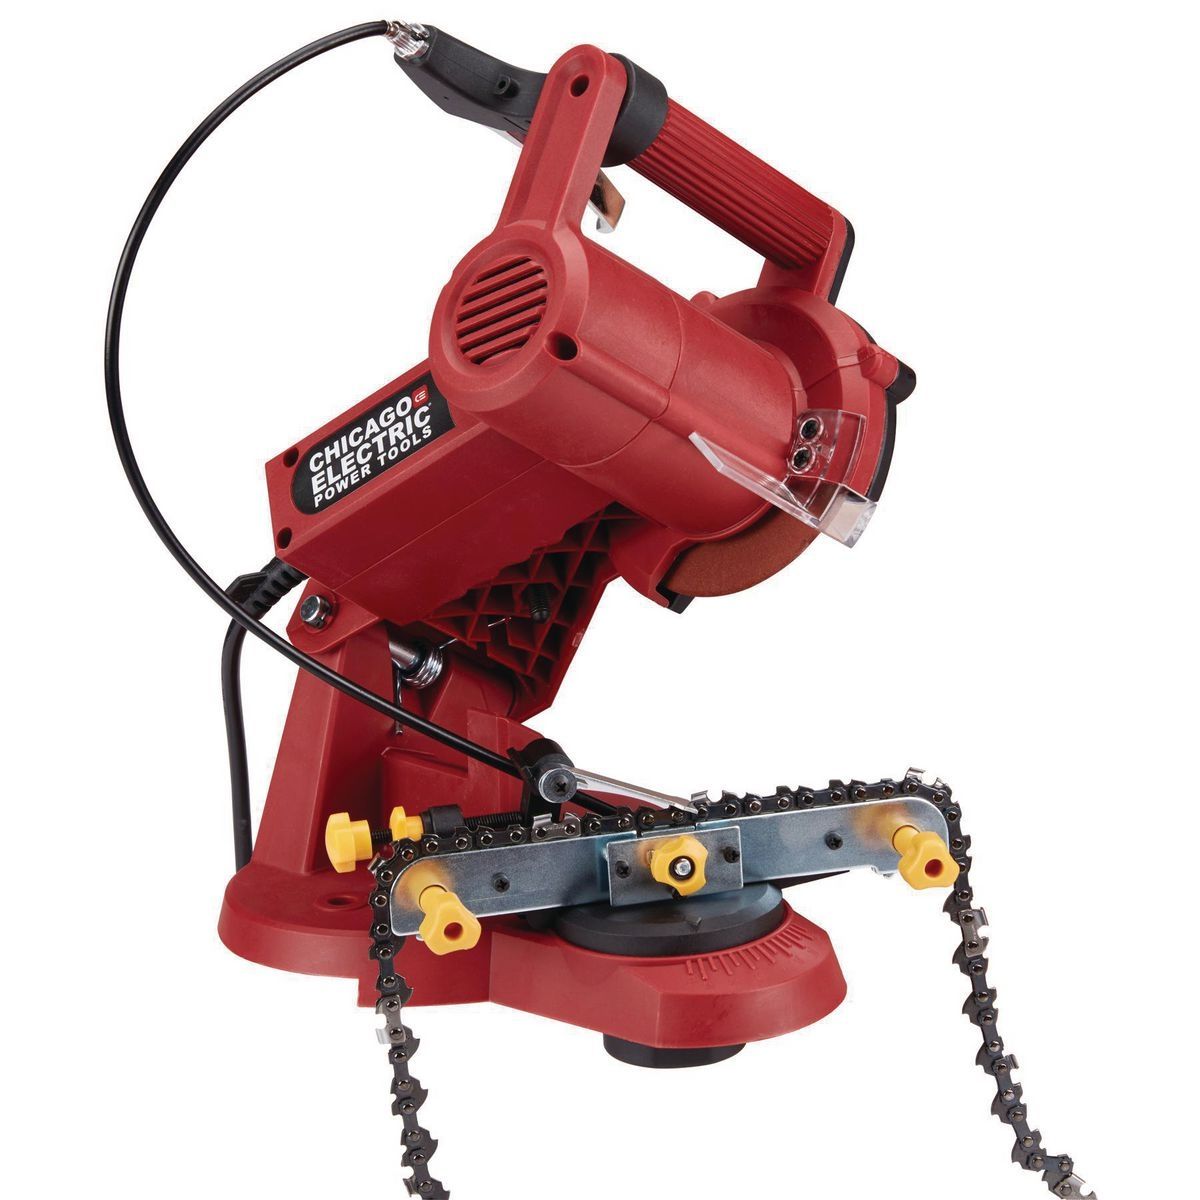 CHICAGO ELECTRIC POWER TOOLS Electric Chain Saw Sharpener